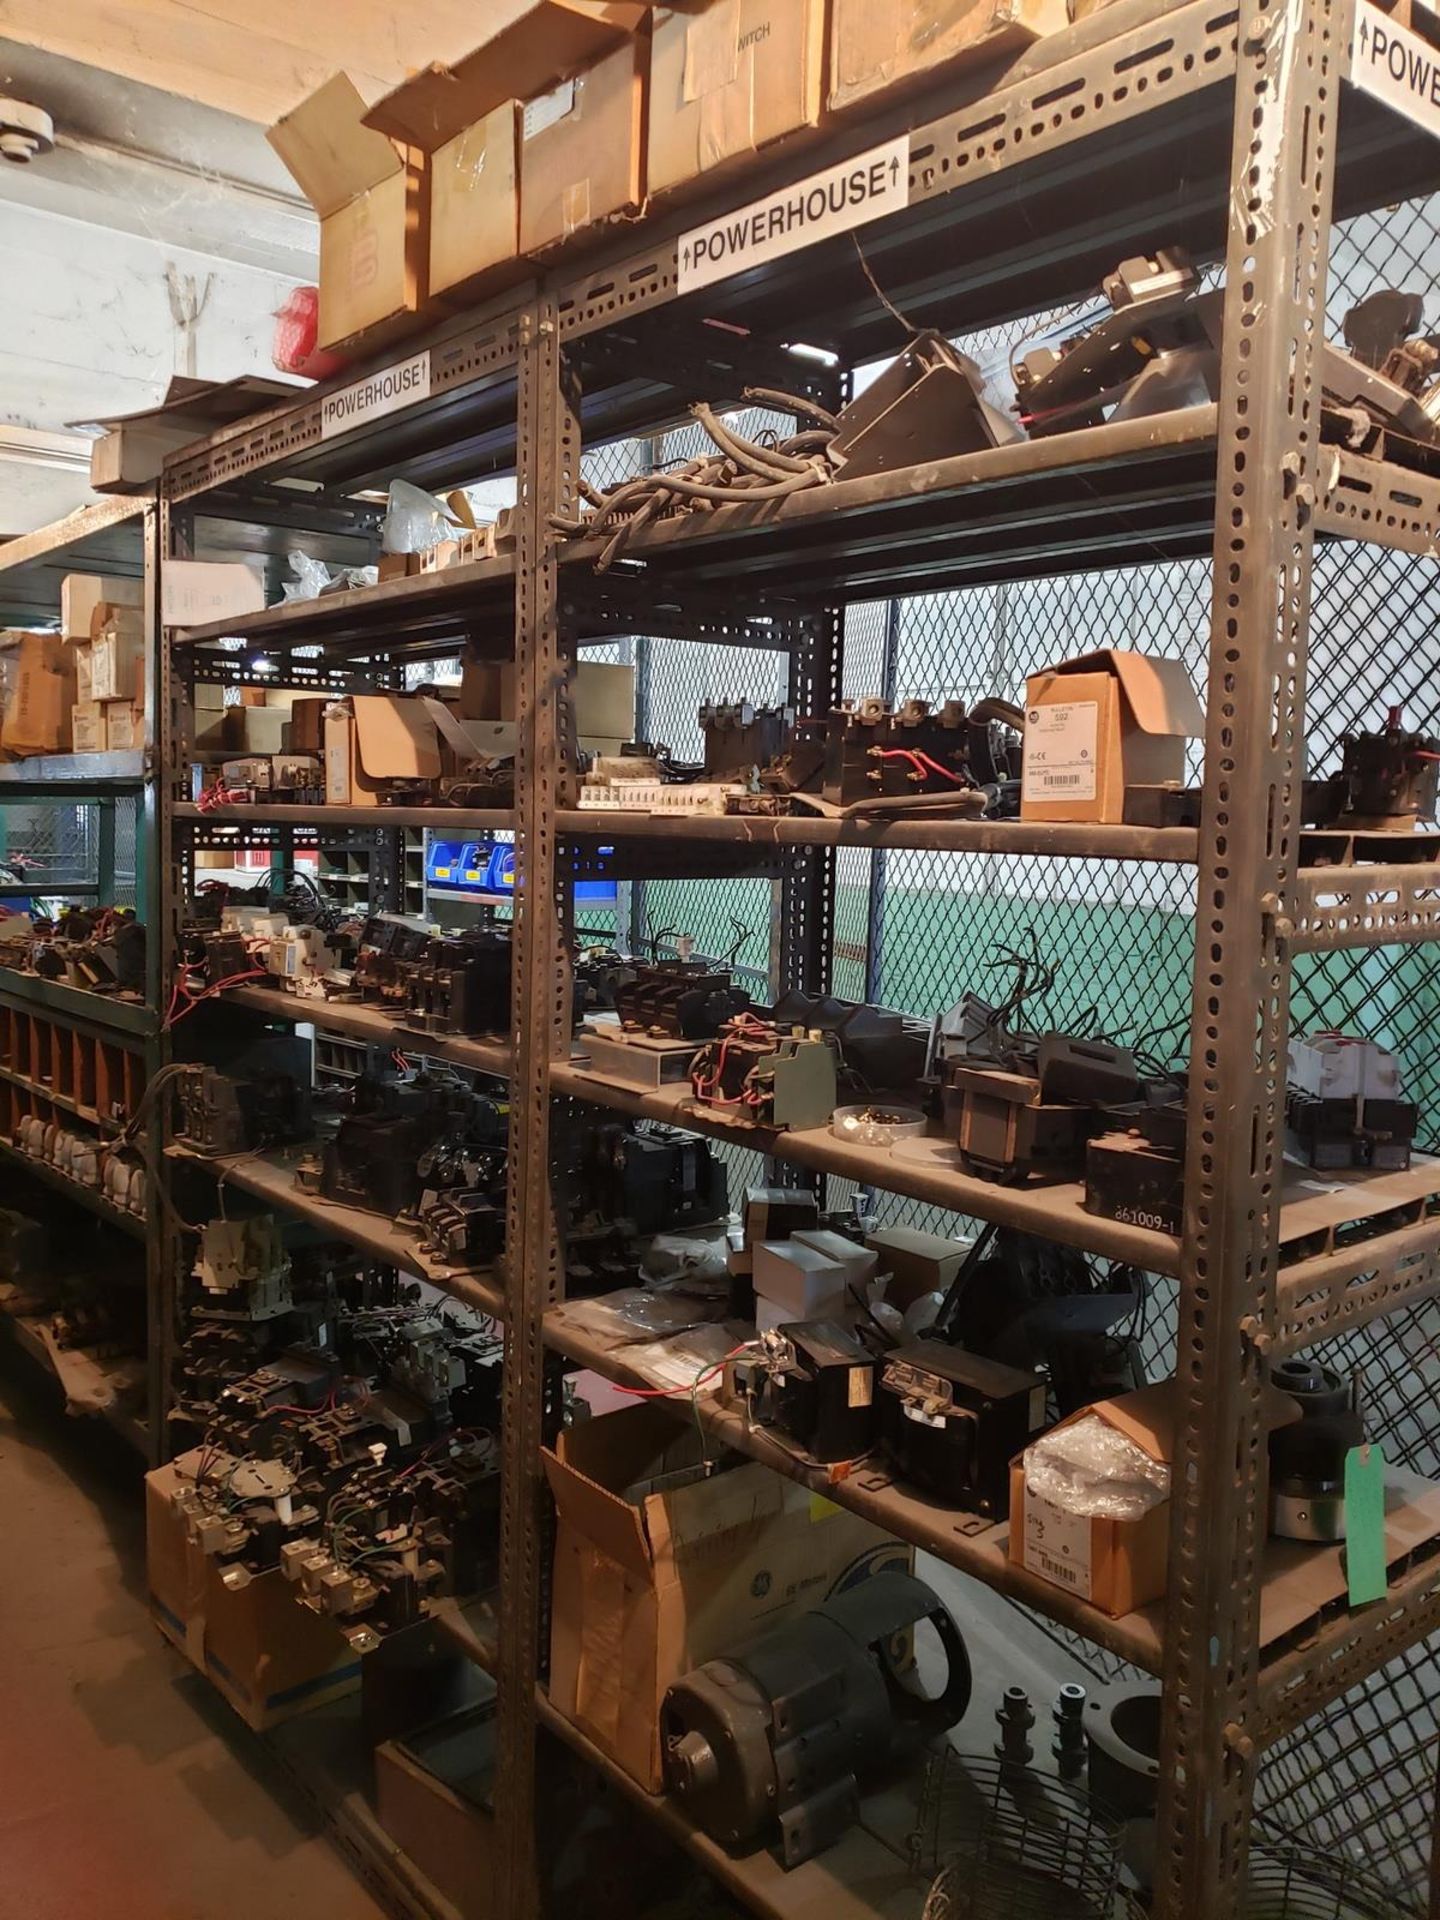 Contents of Spare Parts Storage Cage | Rig Fee $7500 - Image 15 of 20